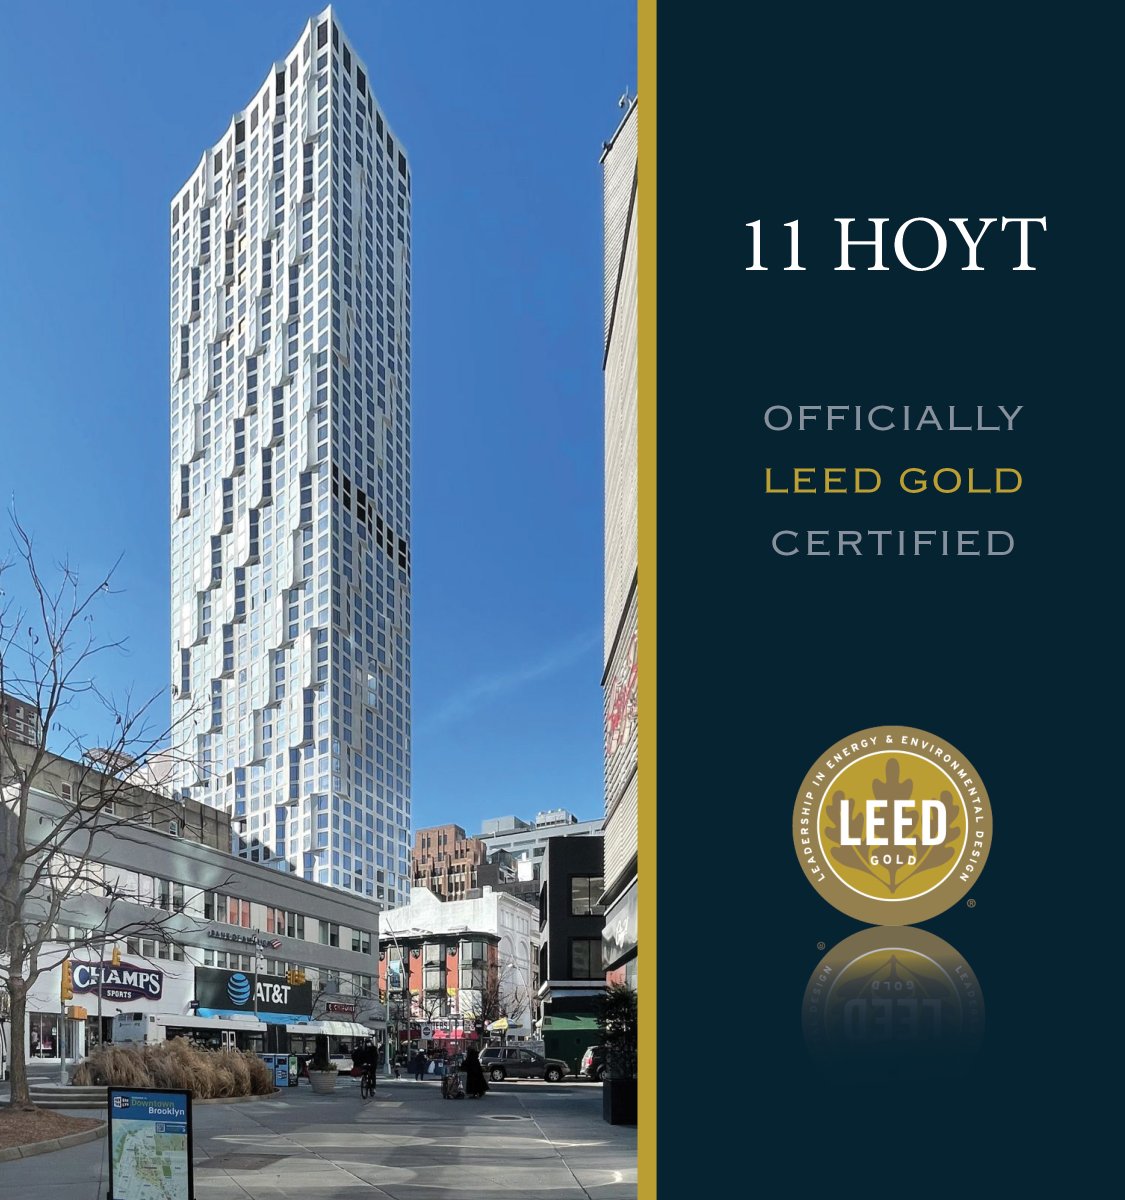 11 Hoyt is now officially LEED Gold certified! Congratulations to the entire team involved in making this happen!
📸 @mchlanglo793

@11hoytbk #11hoytbk #11hoyt #ConstructionManagement #Design #TritonExcellence #LEED #LEEDGold #StudioGang #HillWestArchitects #TishmanSpeyer